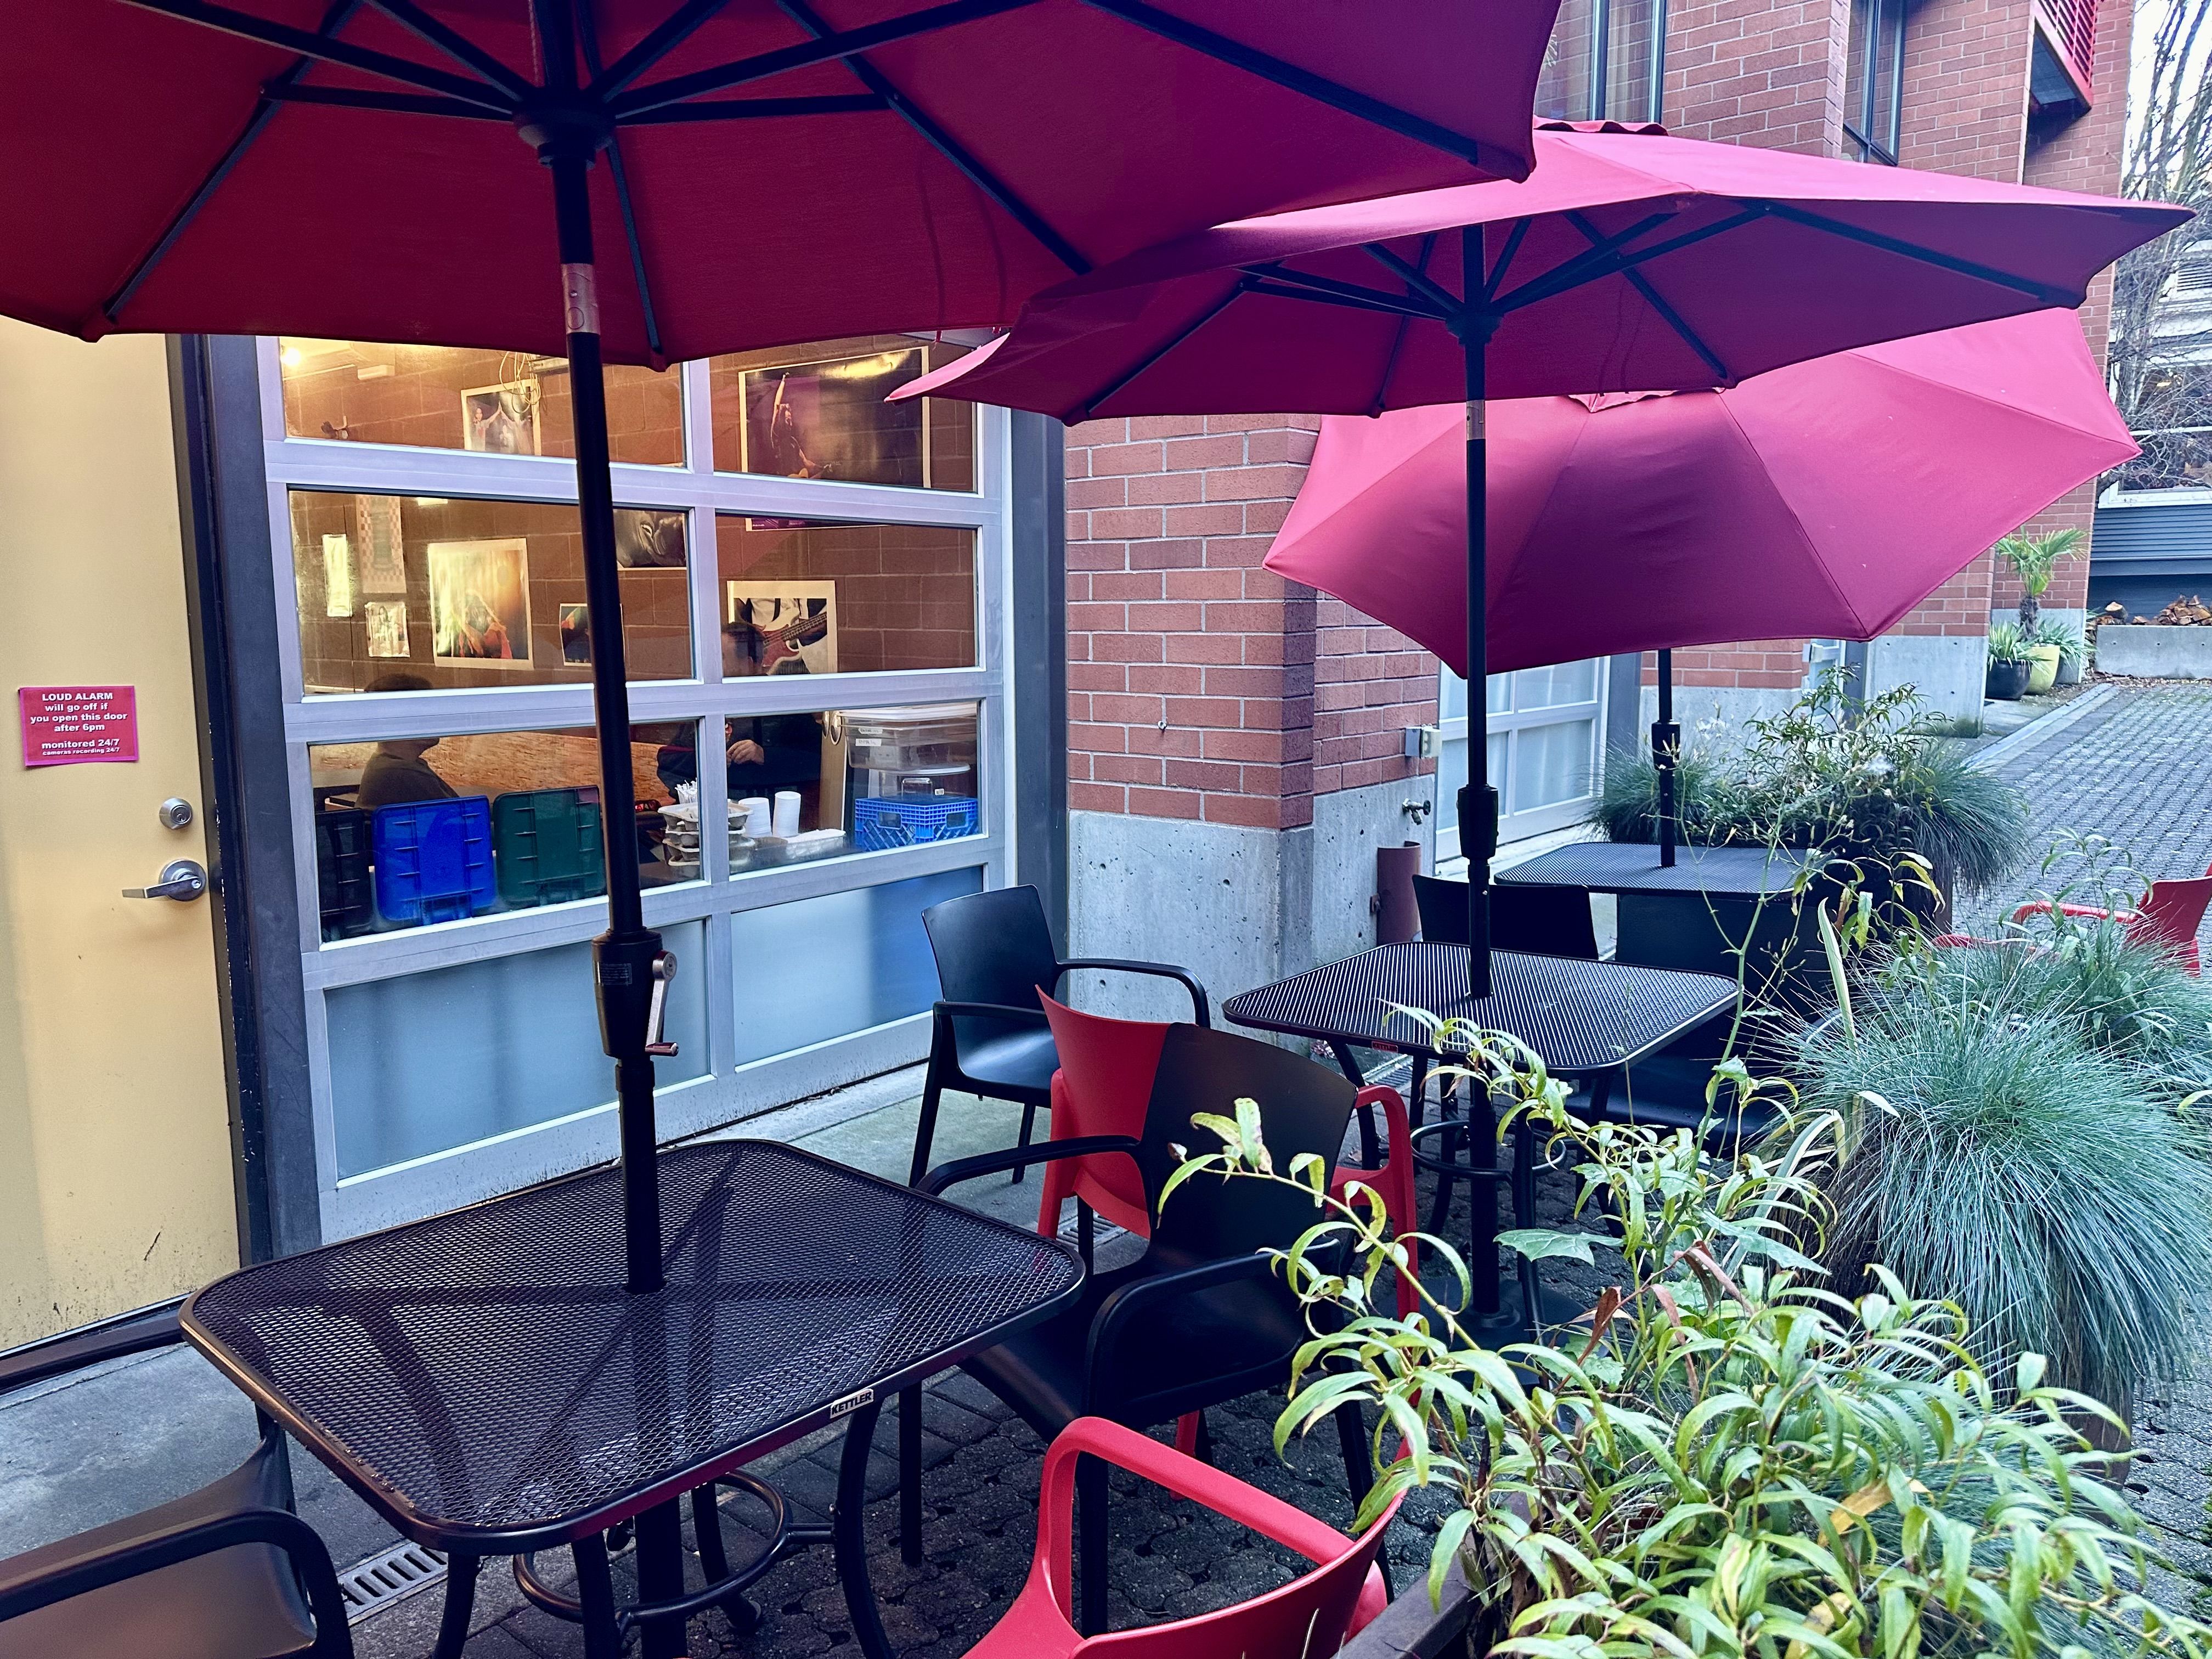 Red umbrellas above outdoor tables, in front of a garage-style window that leads to an indoor cafe.